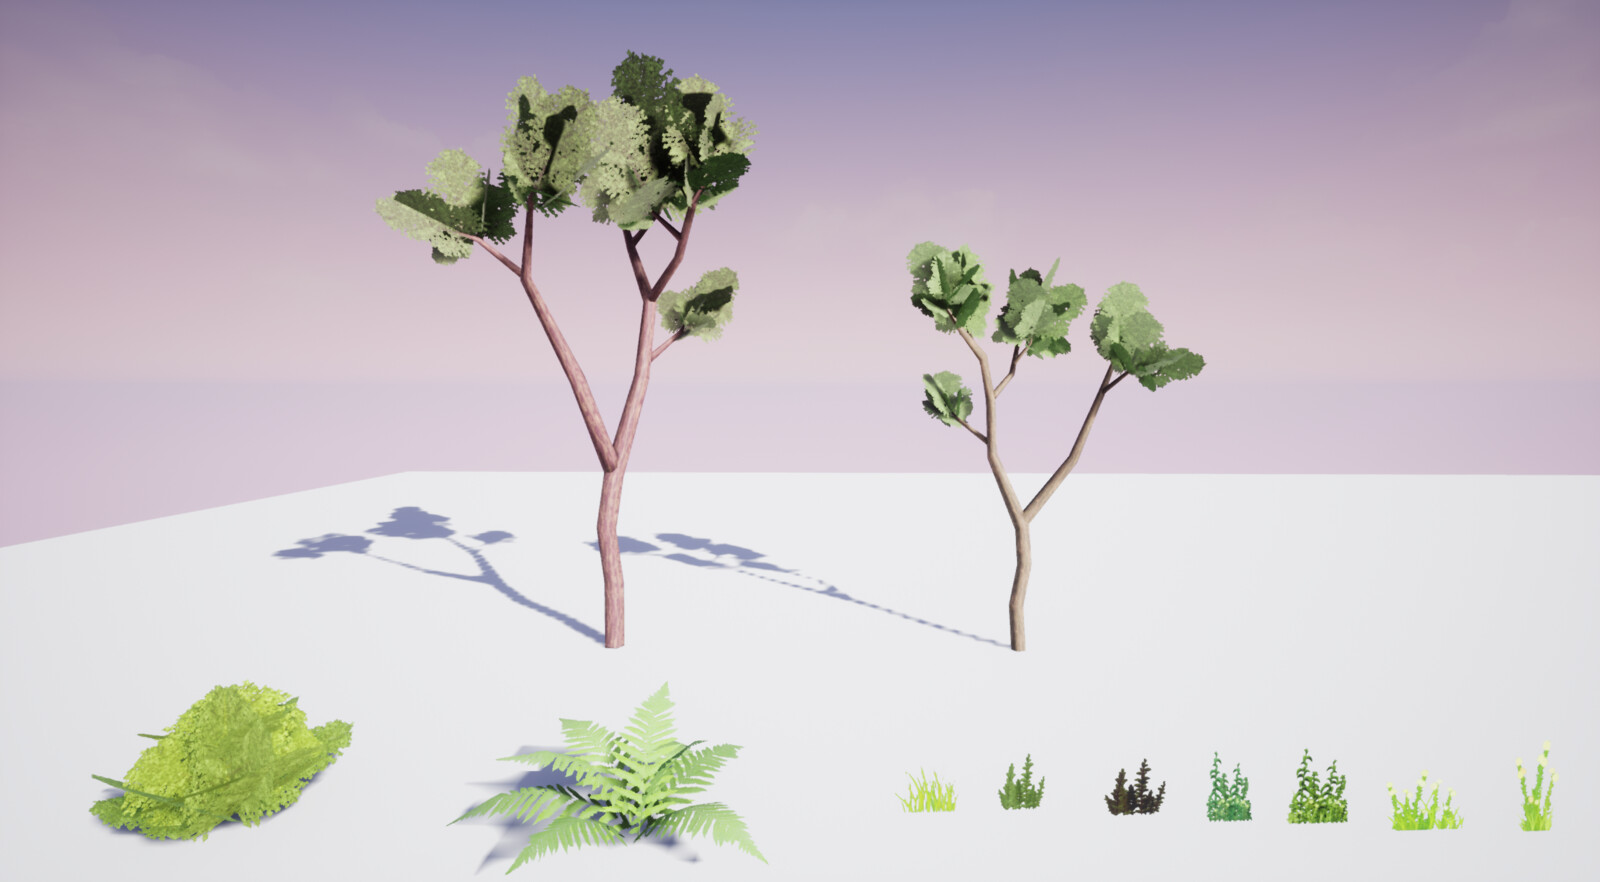 All the foliage together. The tree is the same model with a different rotation and scale.